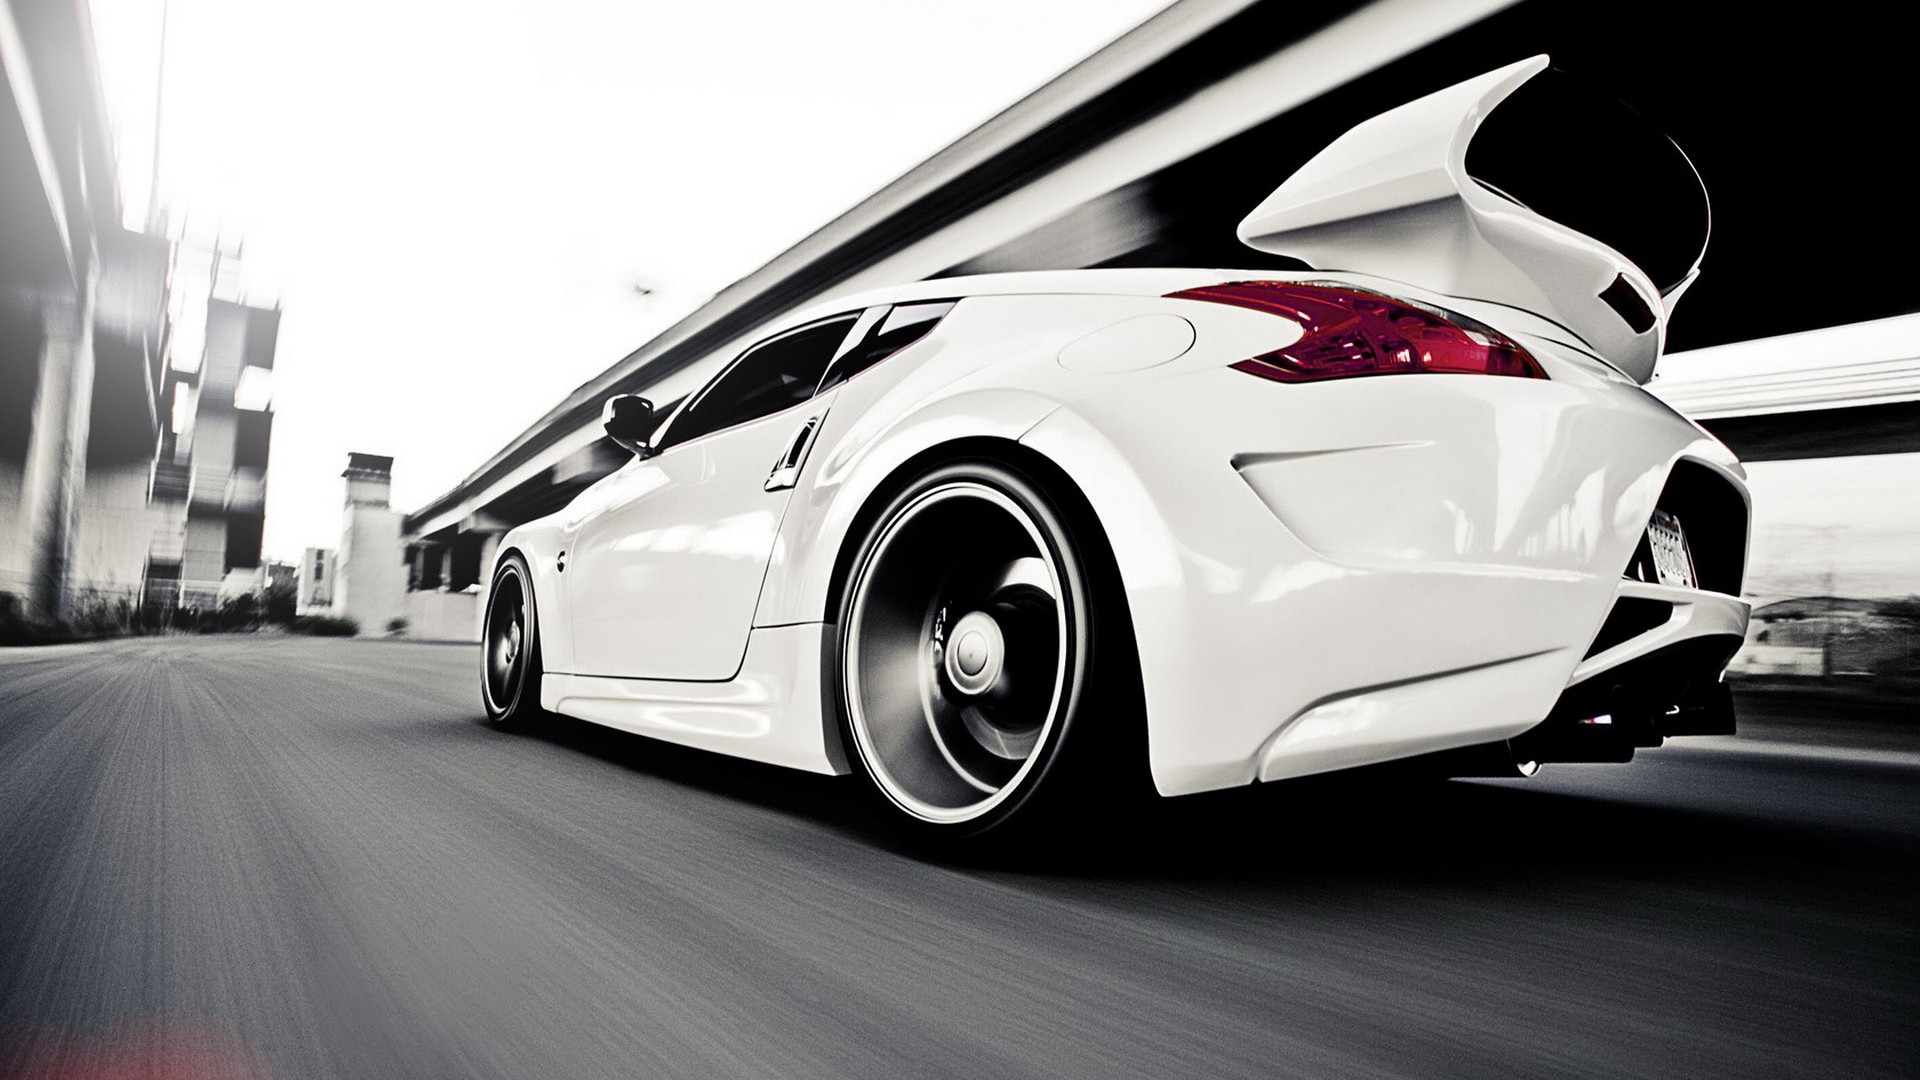 2013 Amazing Car Wallpaper-1080p Free HD Resolutions - My Site